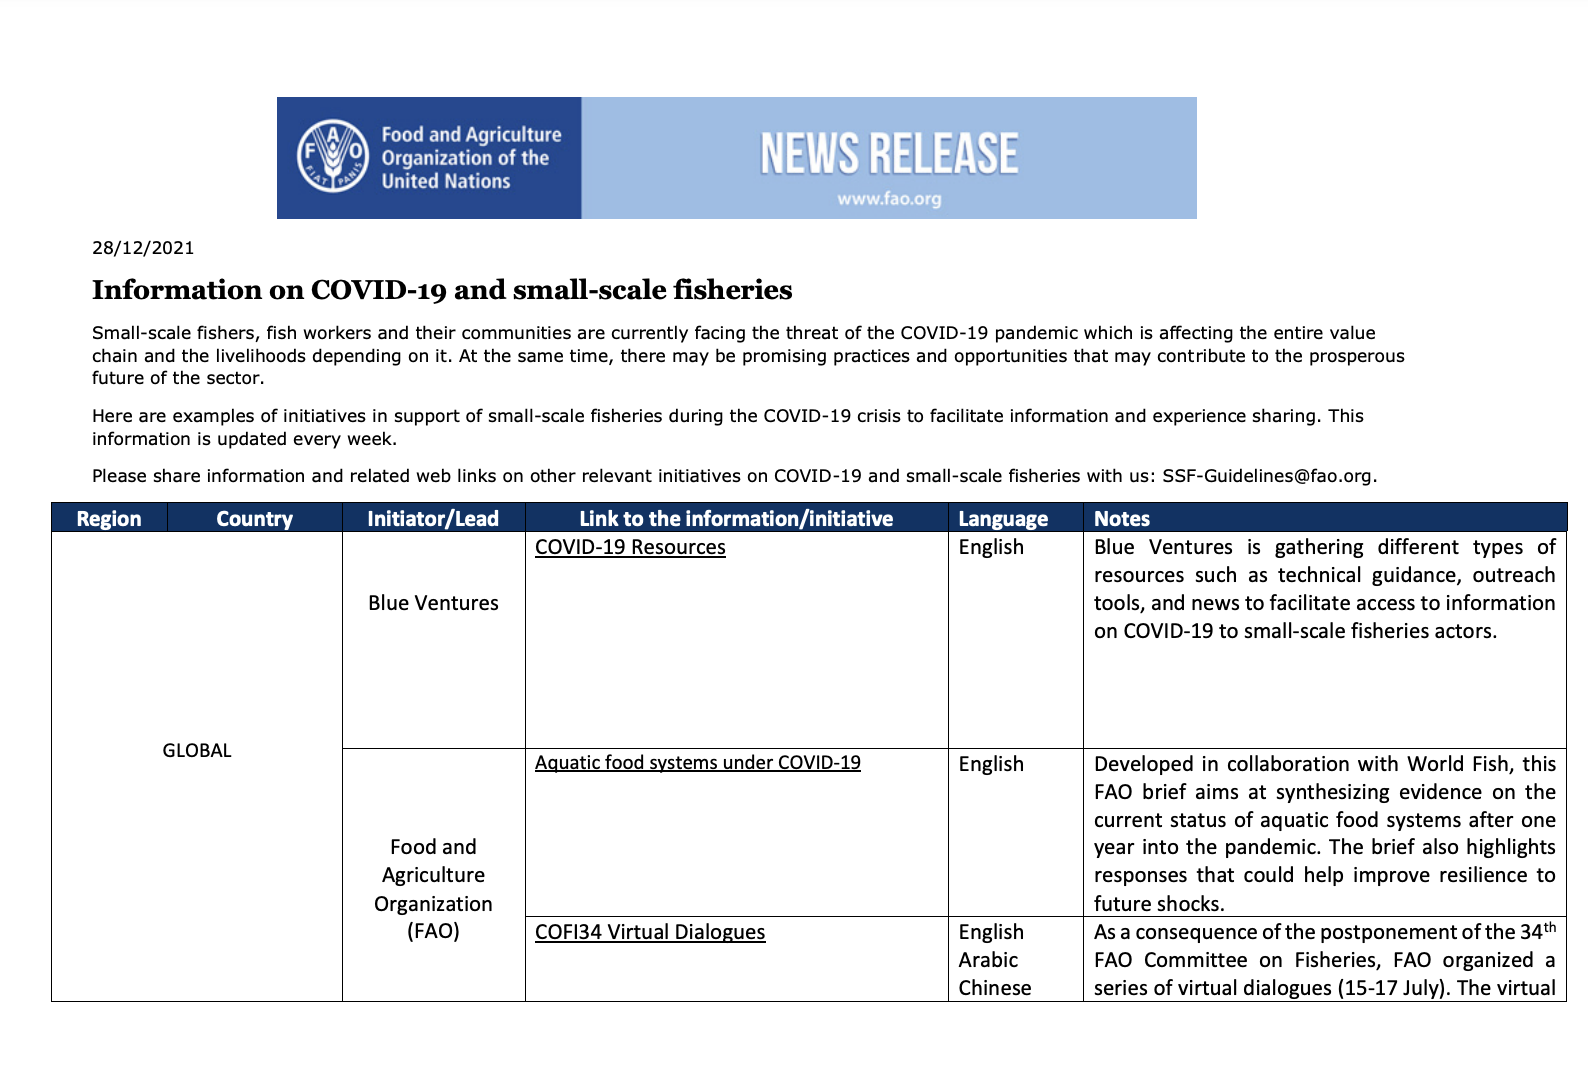 Information on COVID-19 and small-scale fisheries